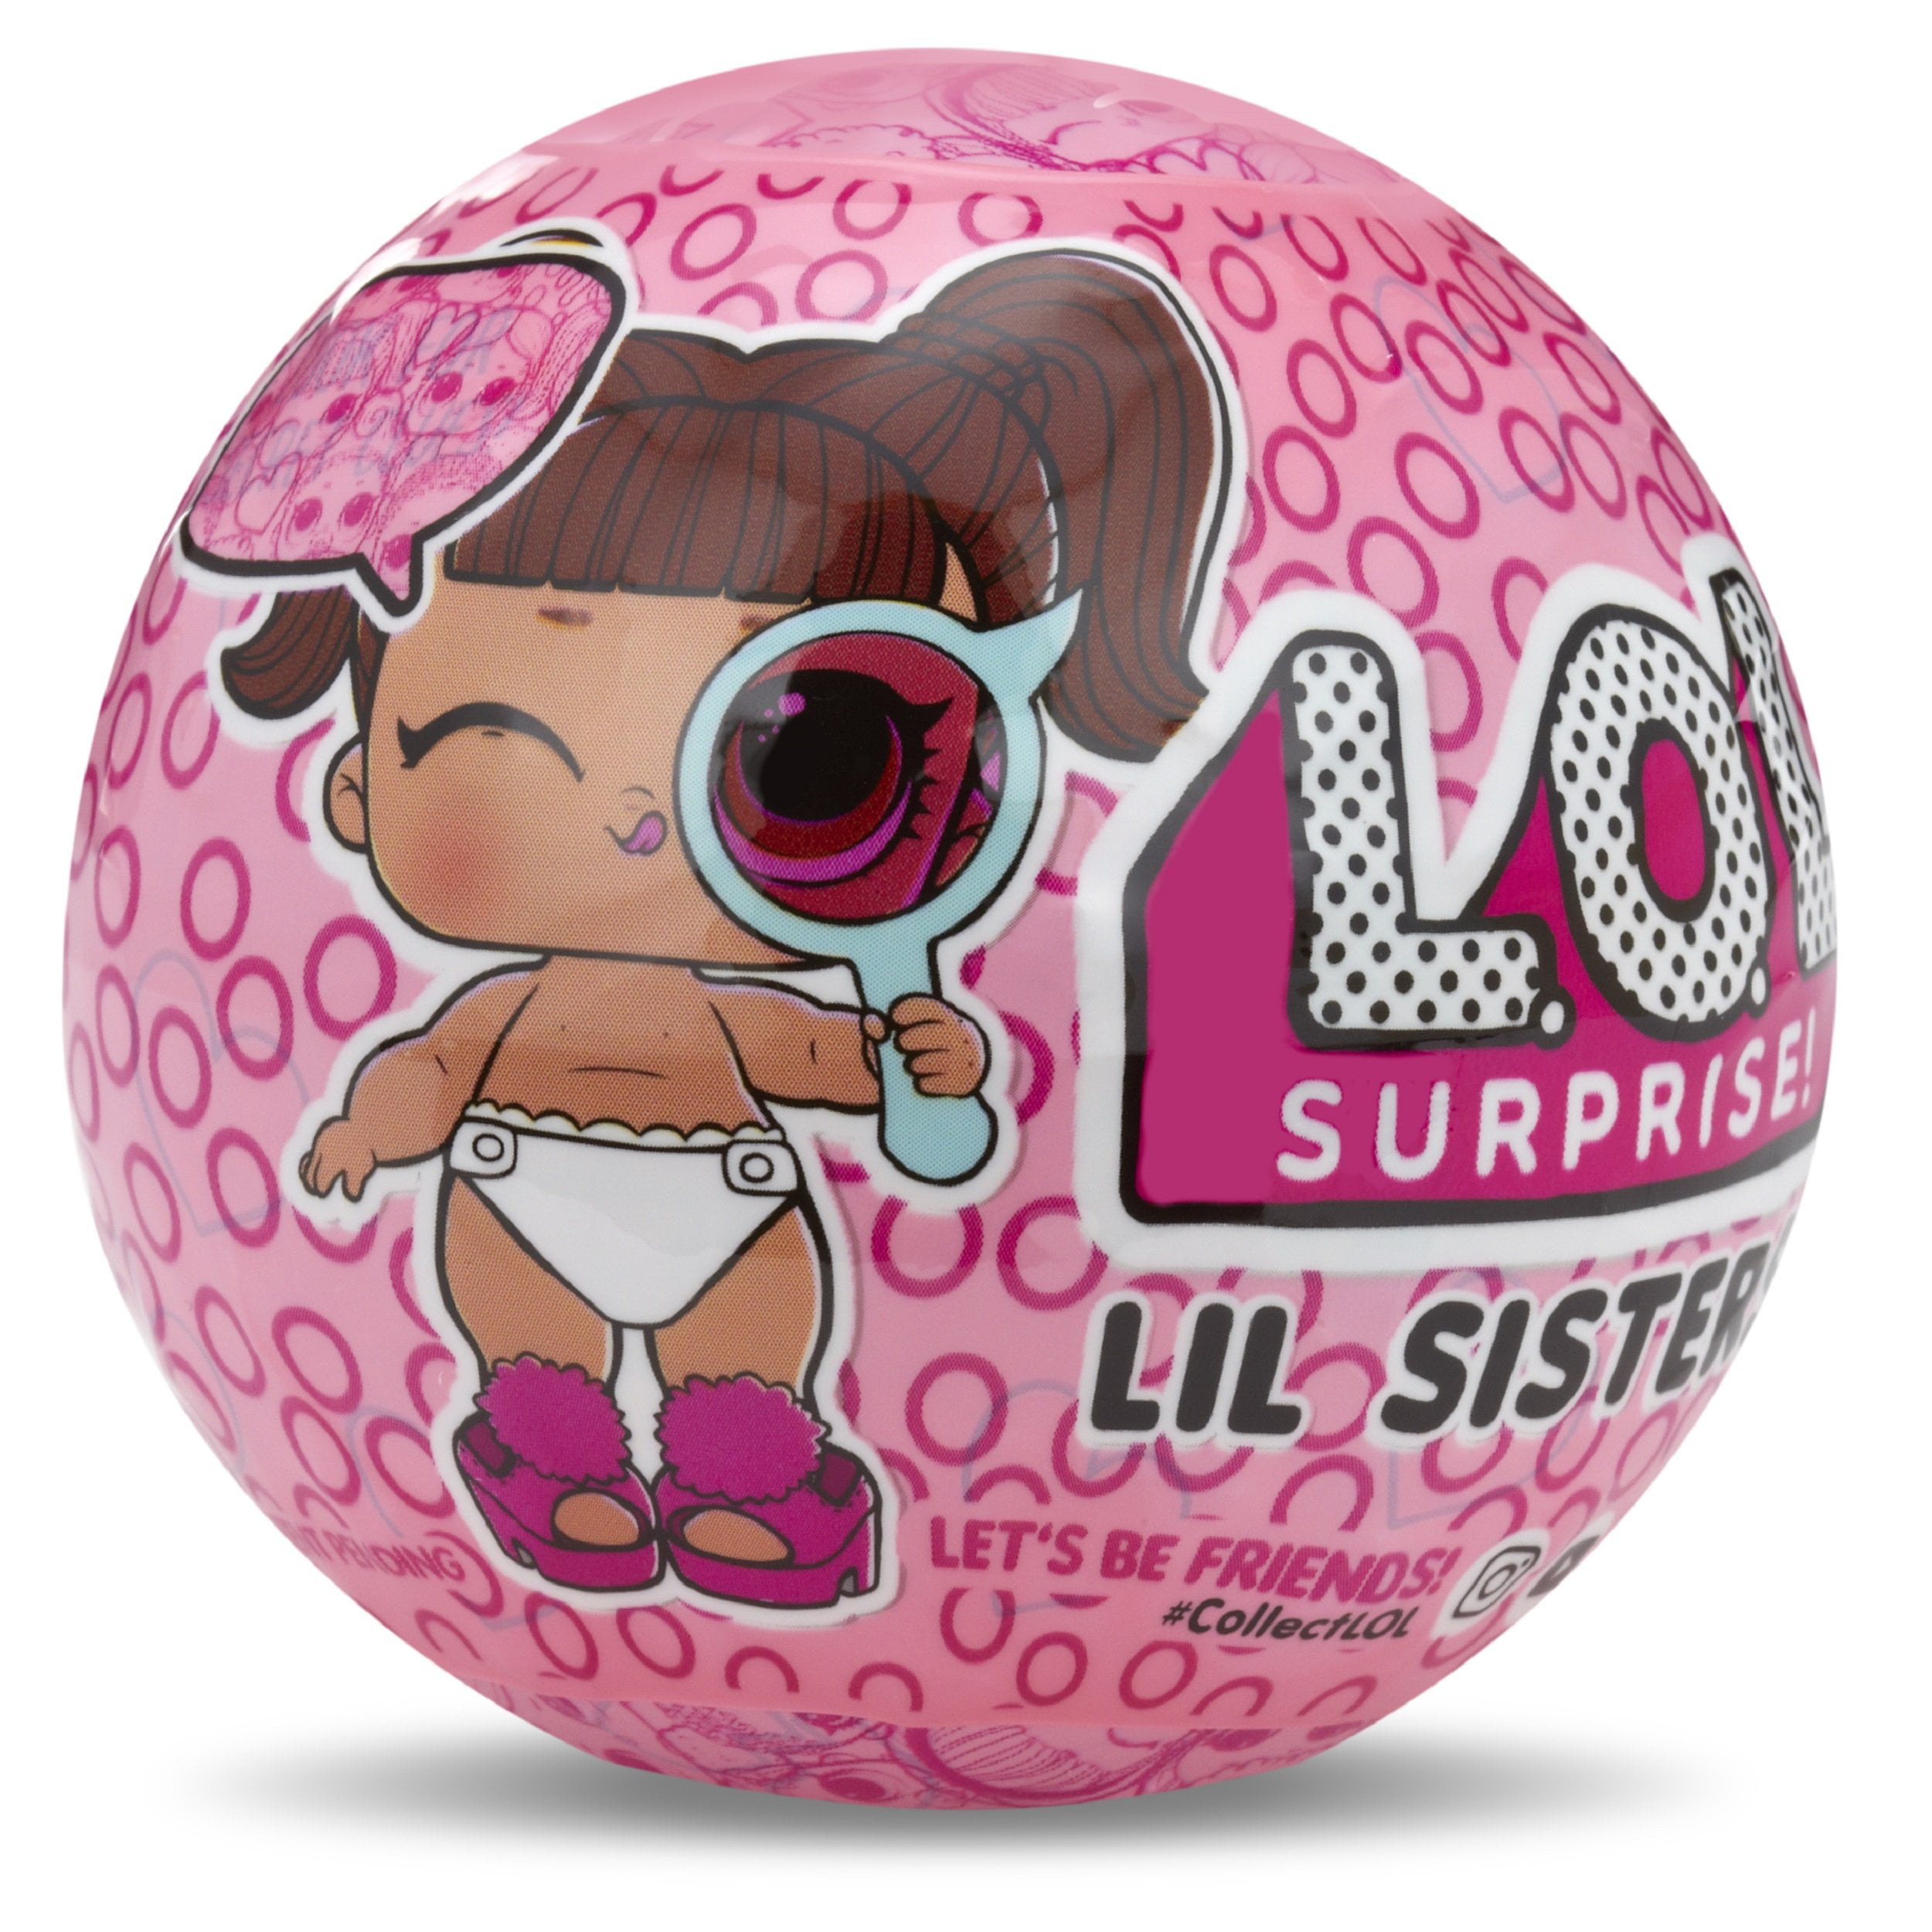 Lol Lil Sisters 4 Store, 52% OFF | www.emanagreen.com